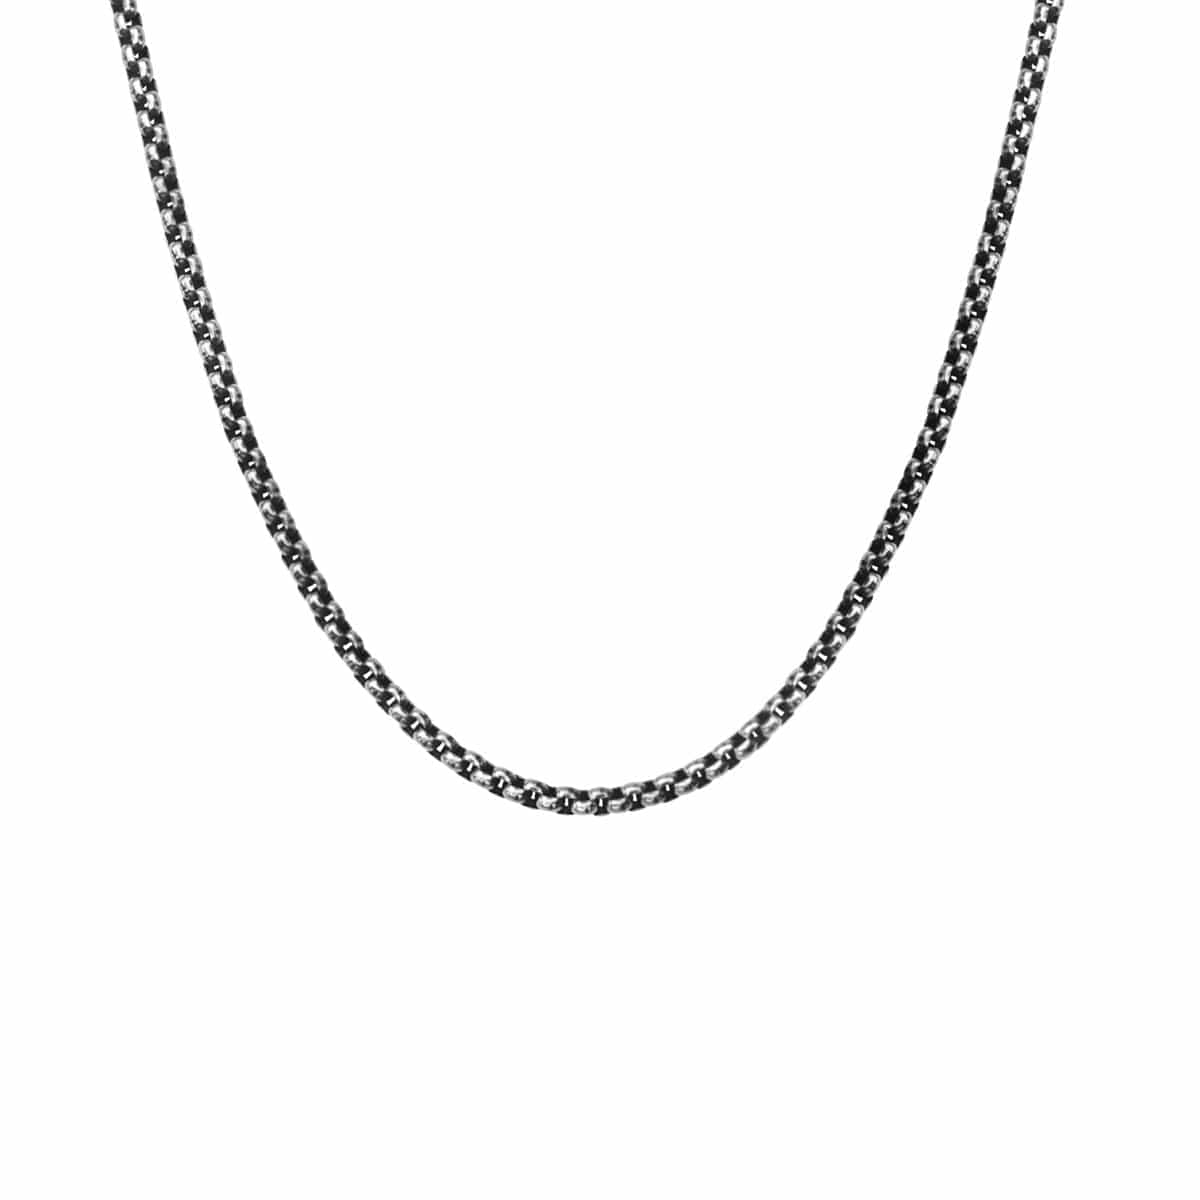 INOX JEWELRY Chains Antiqued Silver Tone Stainless Steel 3mm Bold Box Chain